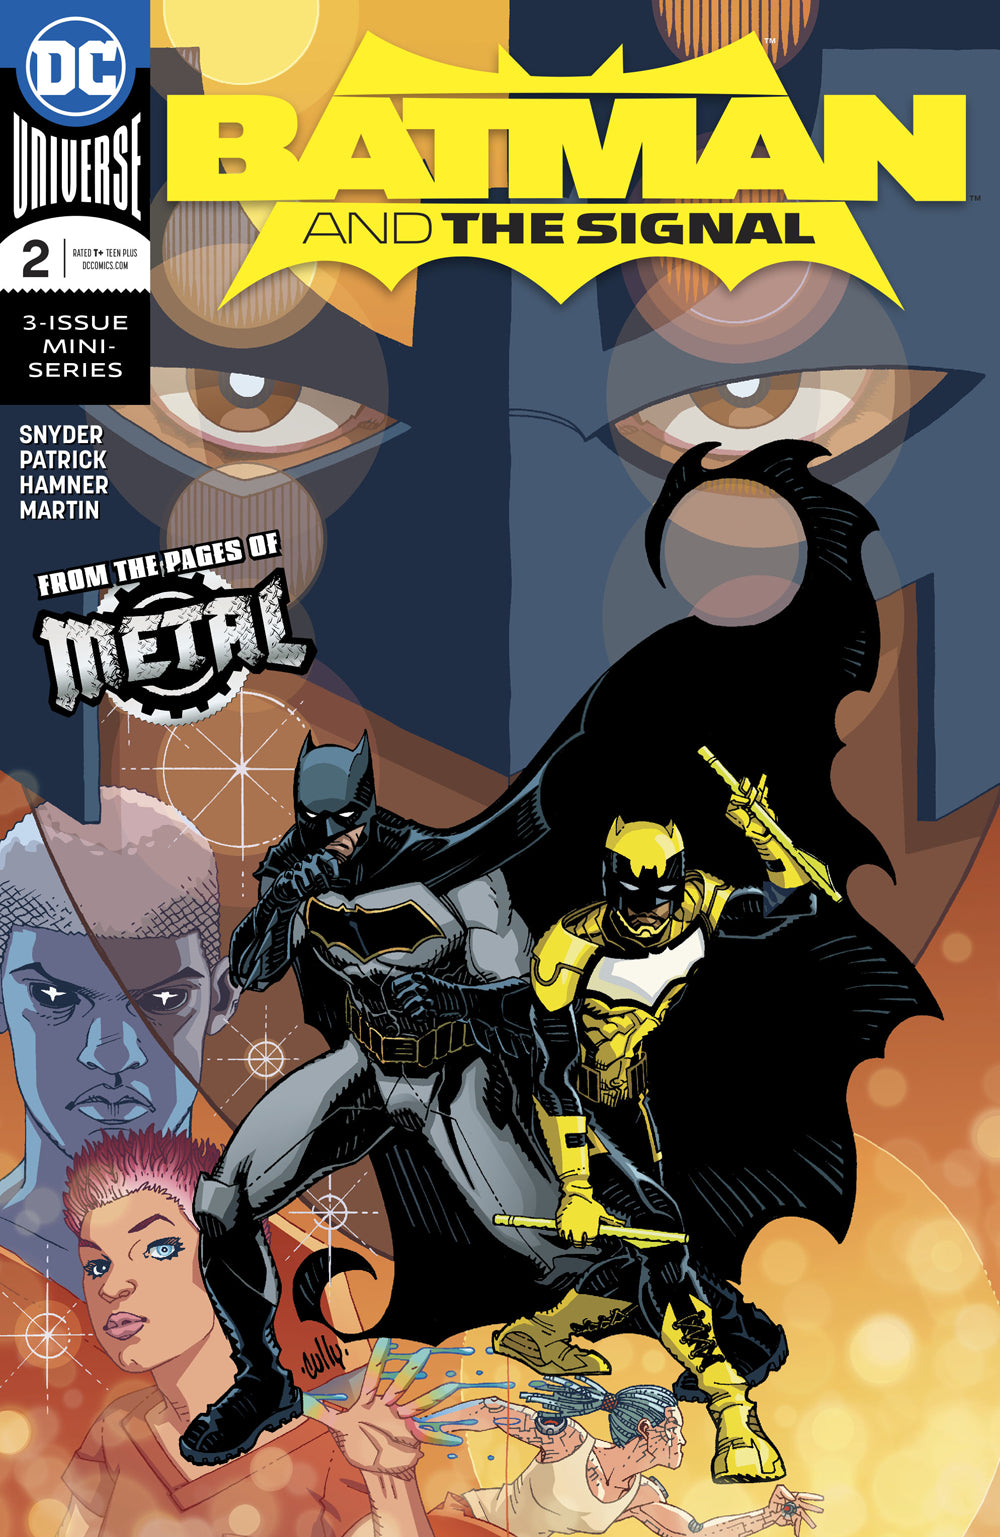 BATMAN AND THE SIGNAL #2 (OF 3) COVER